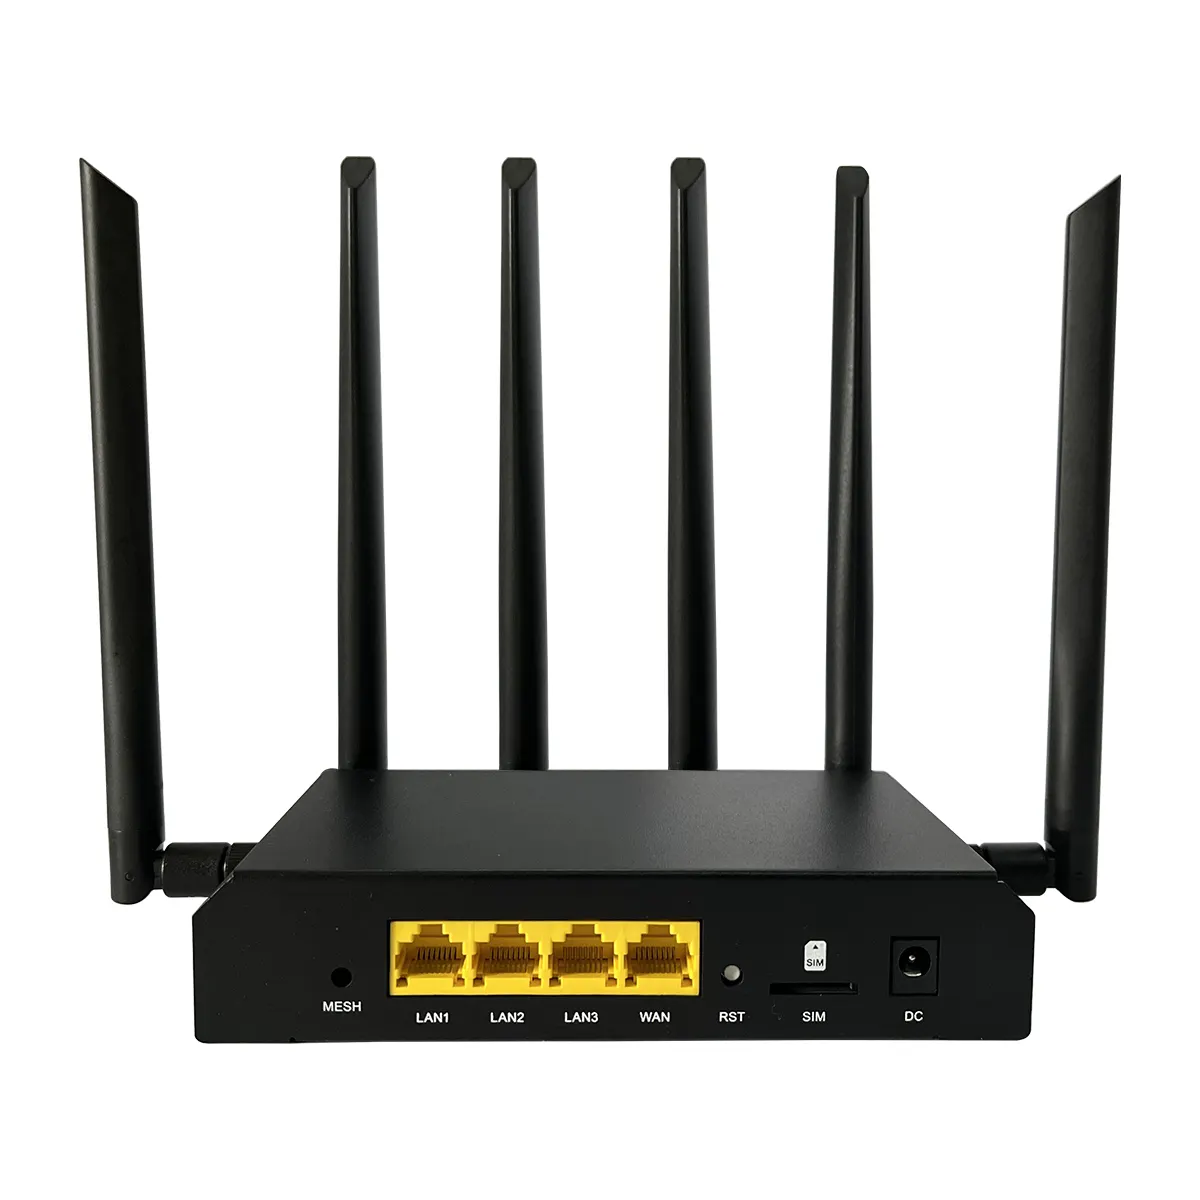 LAN port 4g router with sim card 4g lte router modem